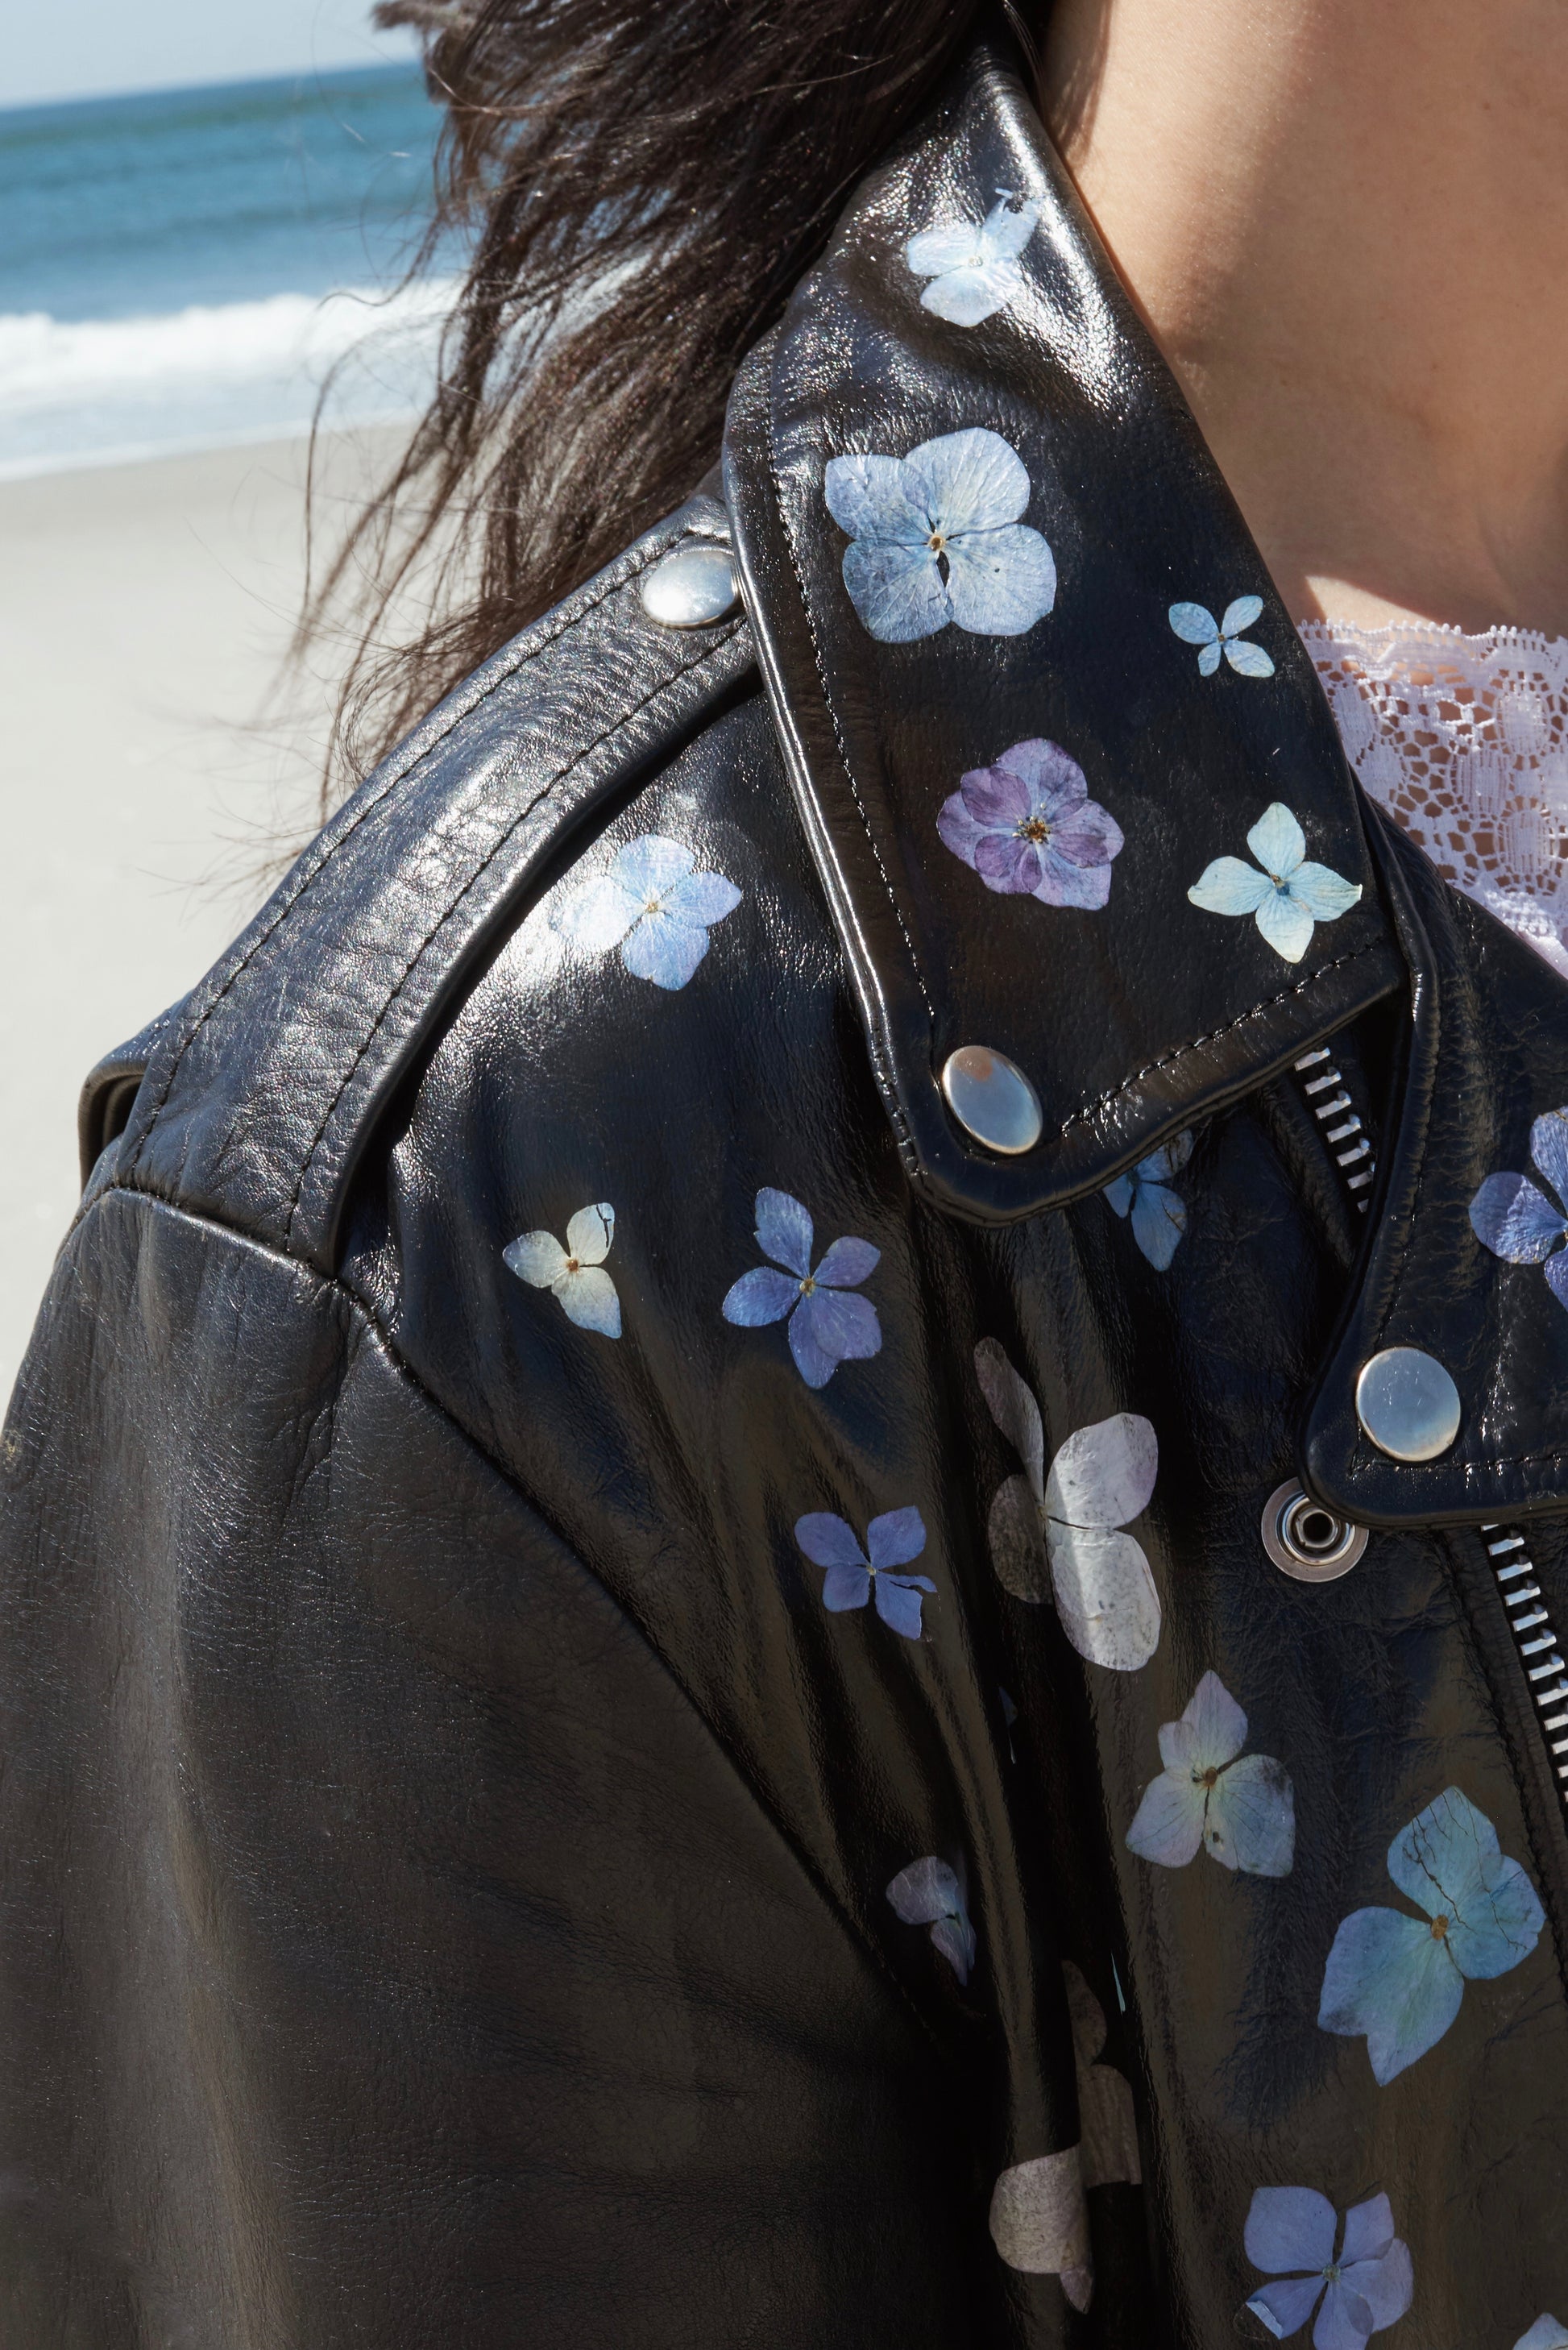 Inspired by the sidewalk gardens lining New York City each spring. This is a vintage black leather jacket coated in white paint, delicately adorned with real pressed flowers.